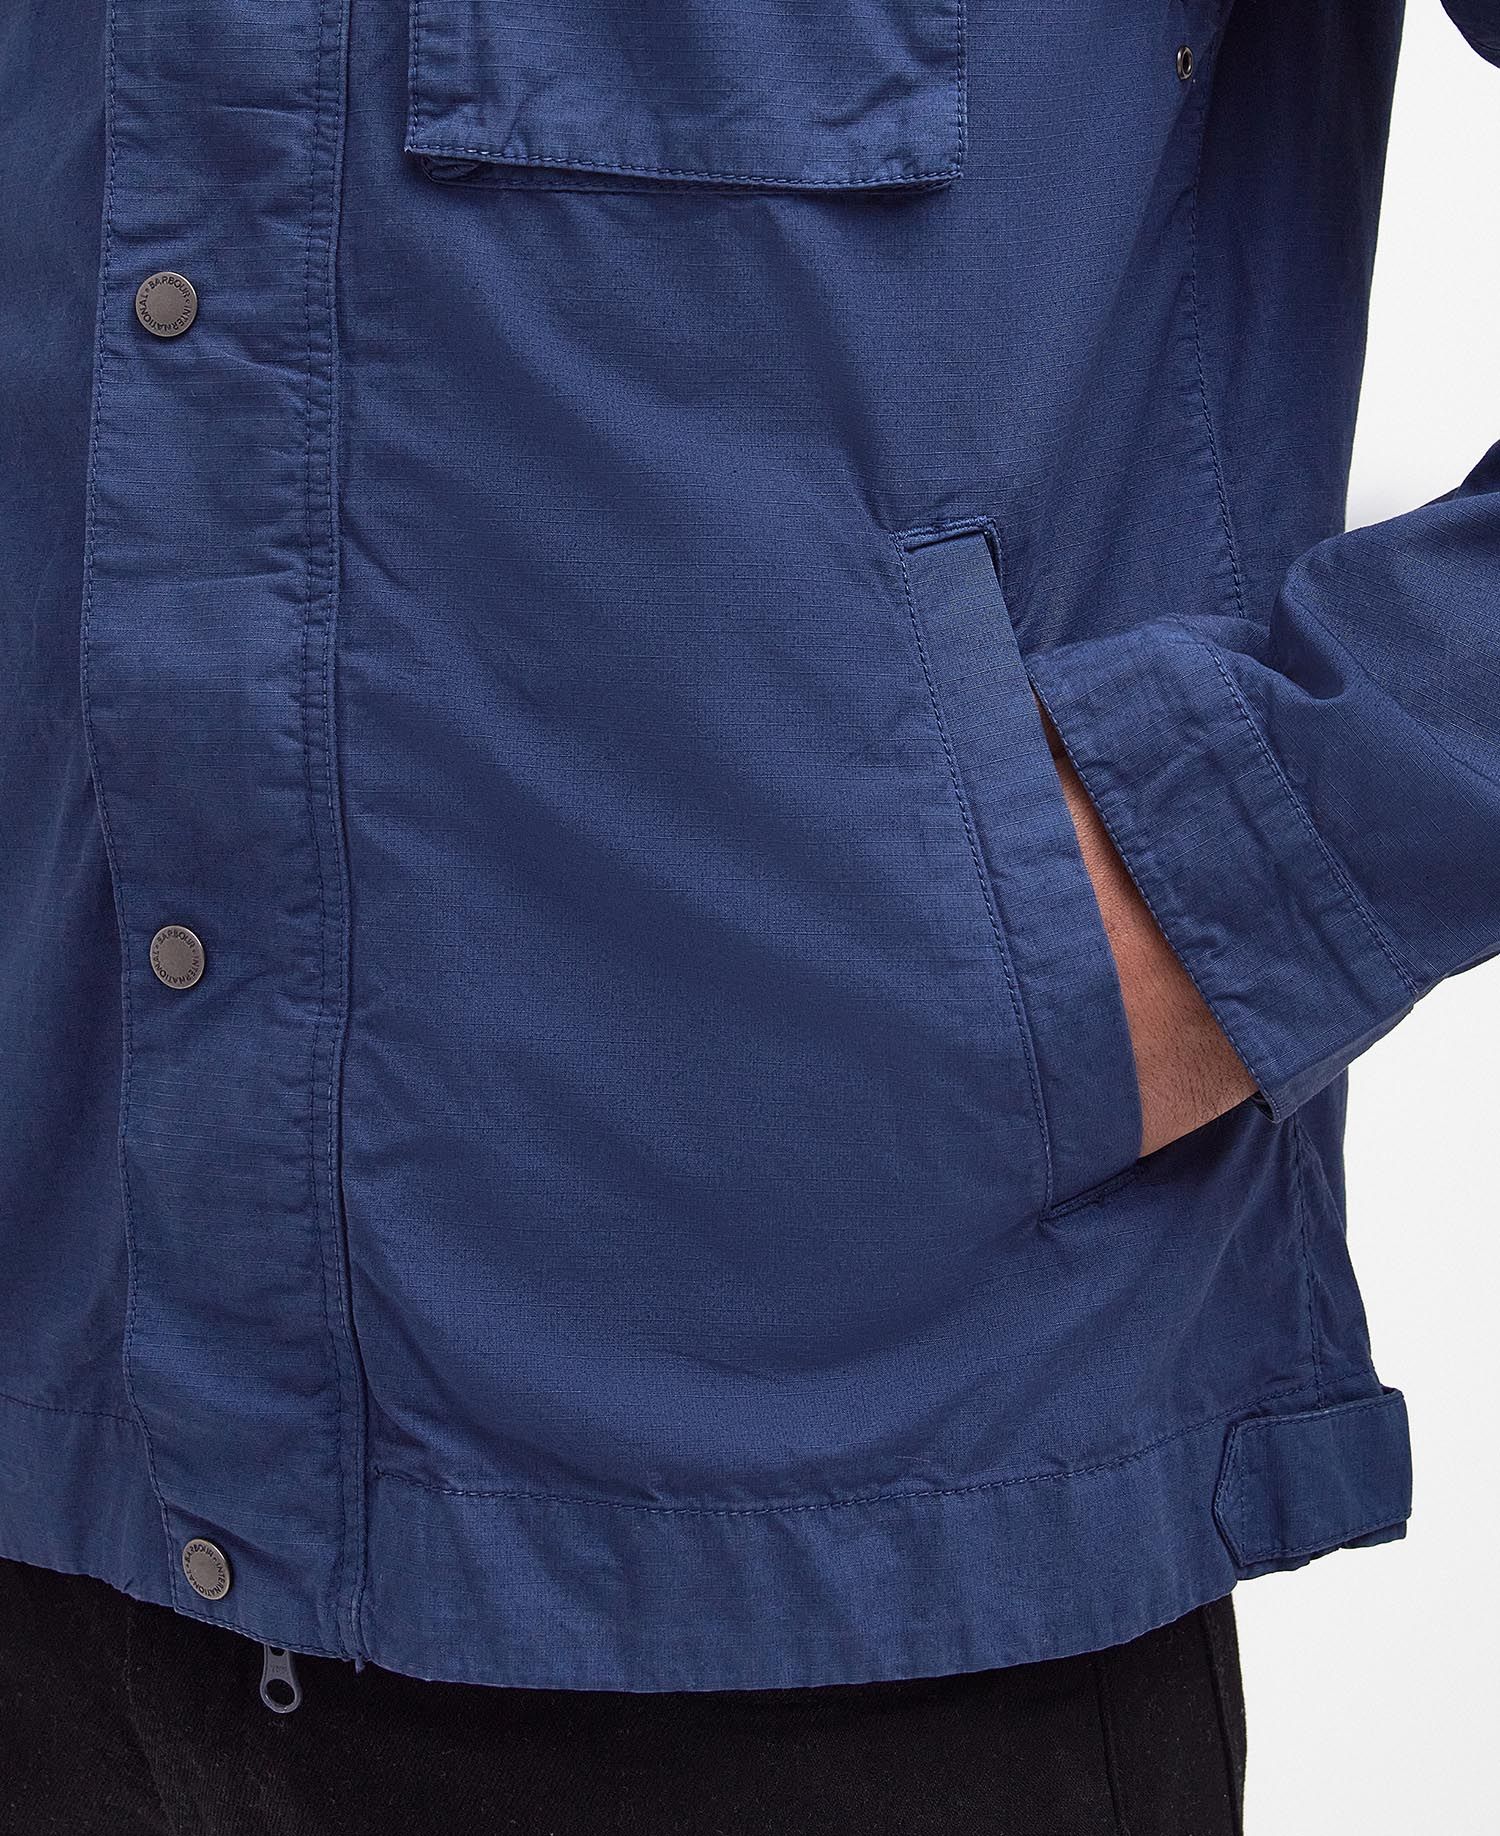 Barbour International SMQ Workers Casual Jacket - Washed Cobalt